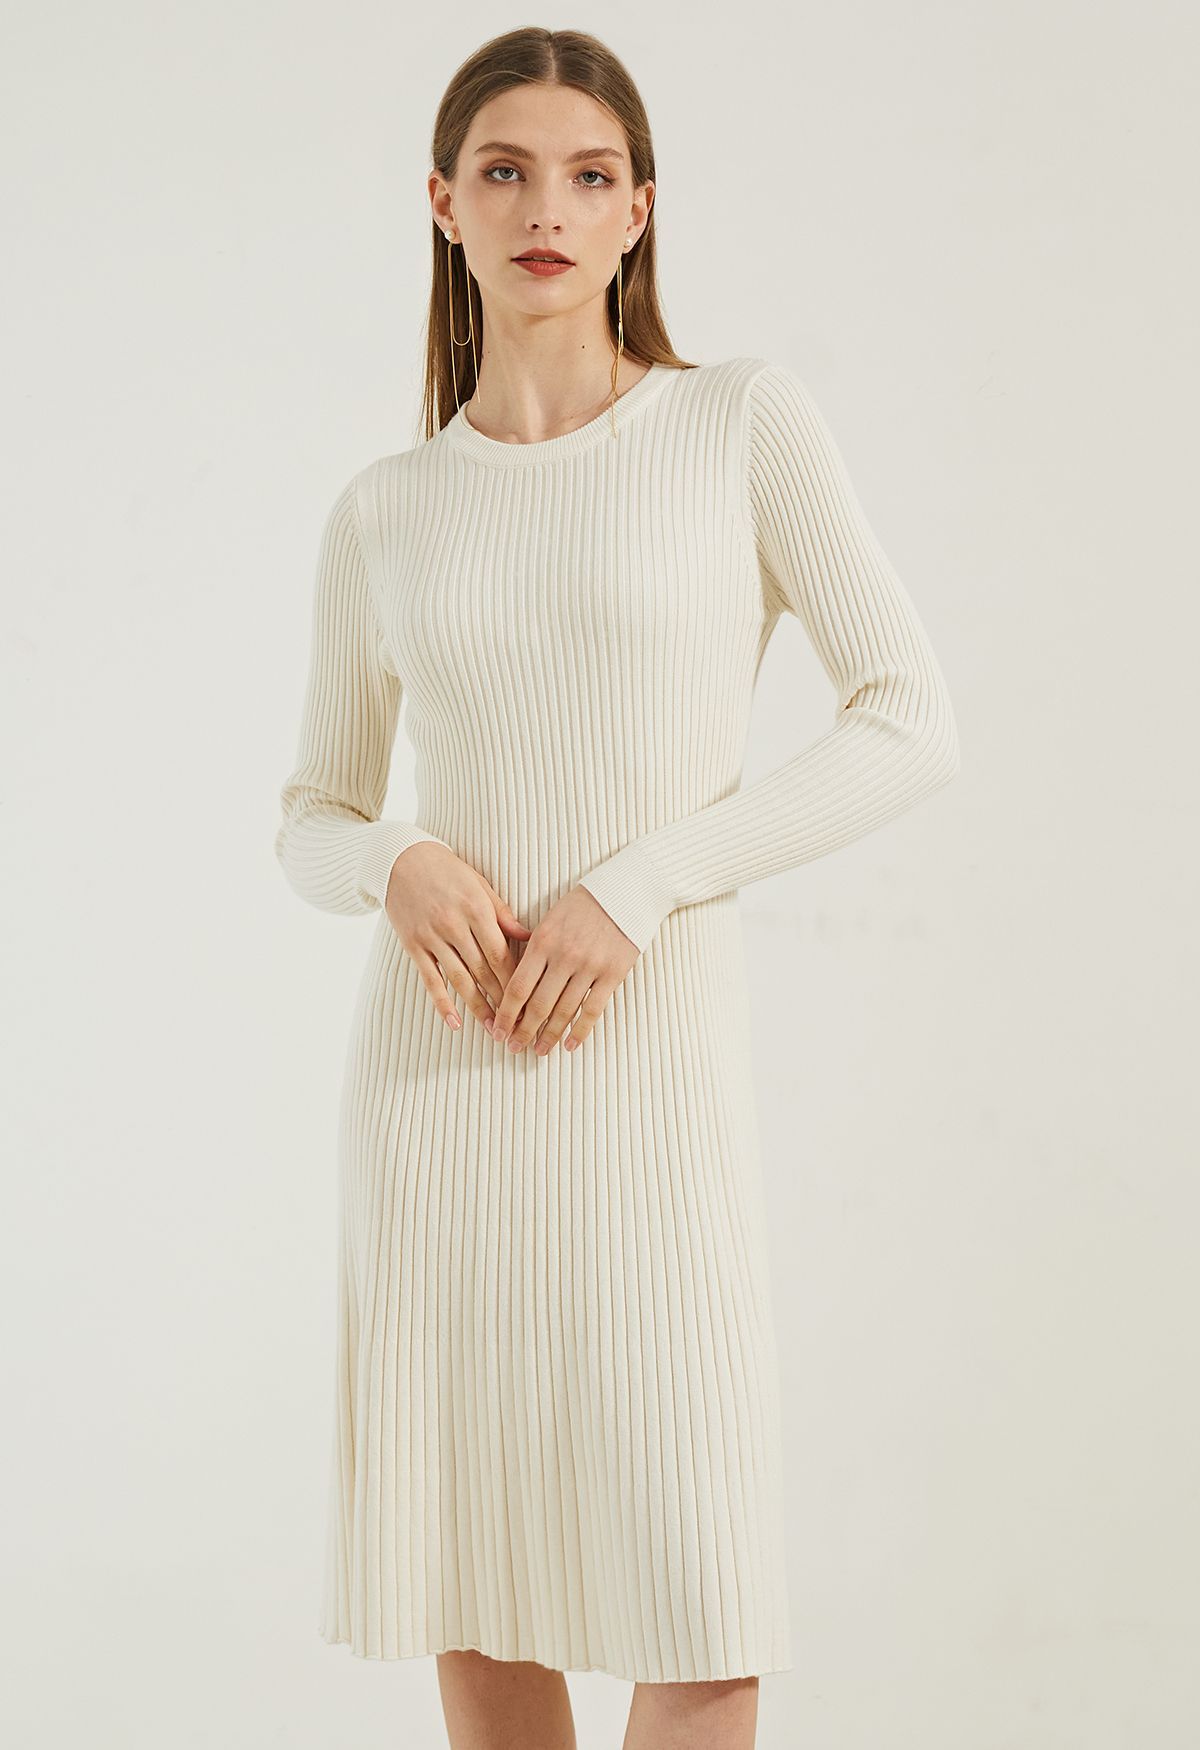 Ribbed Texture Frilling Midi Dress in Cream | Chicwish